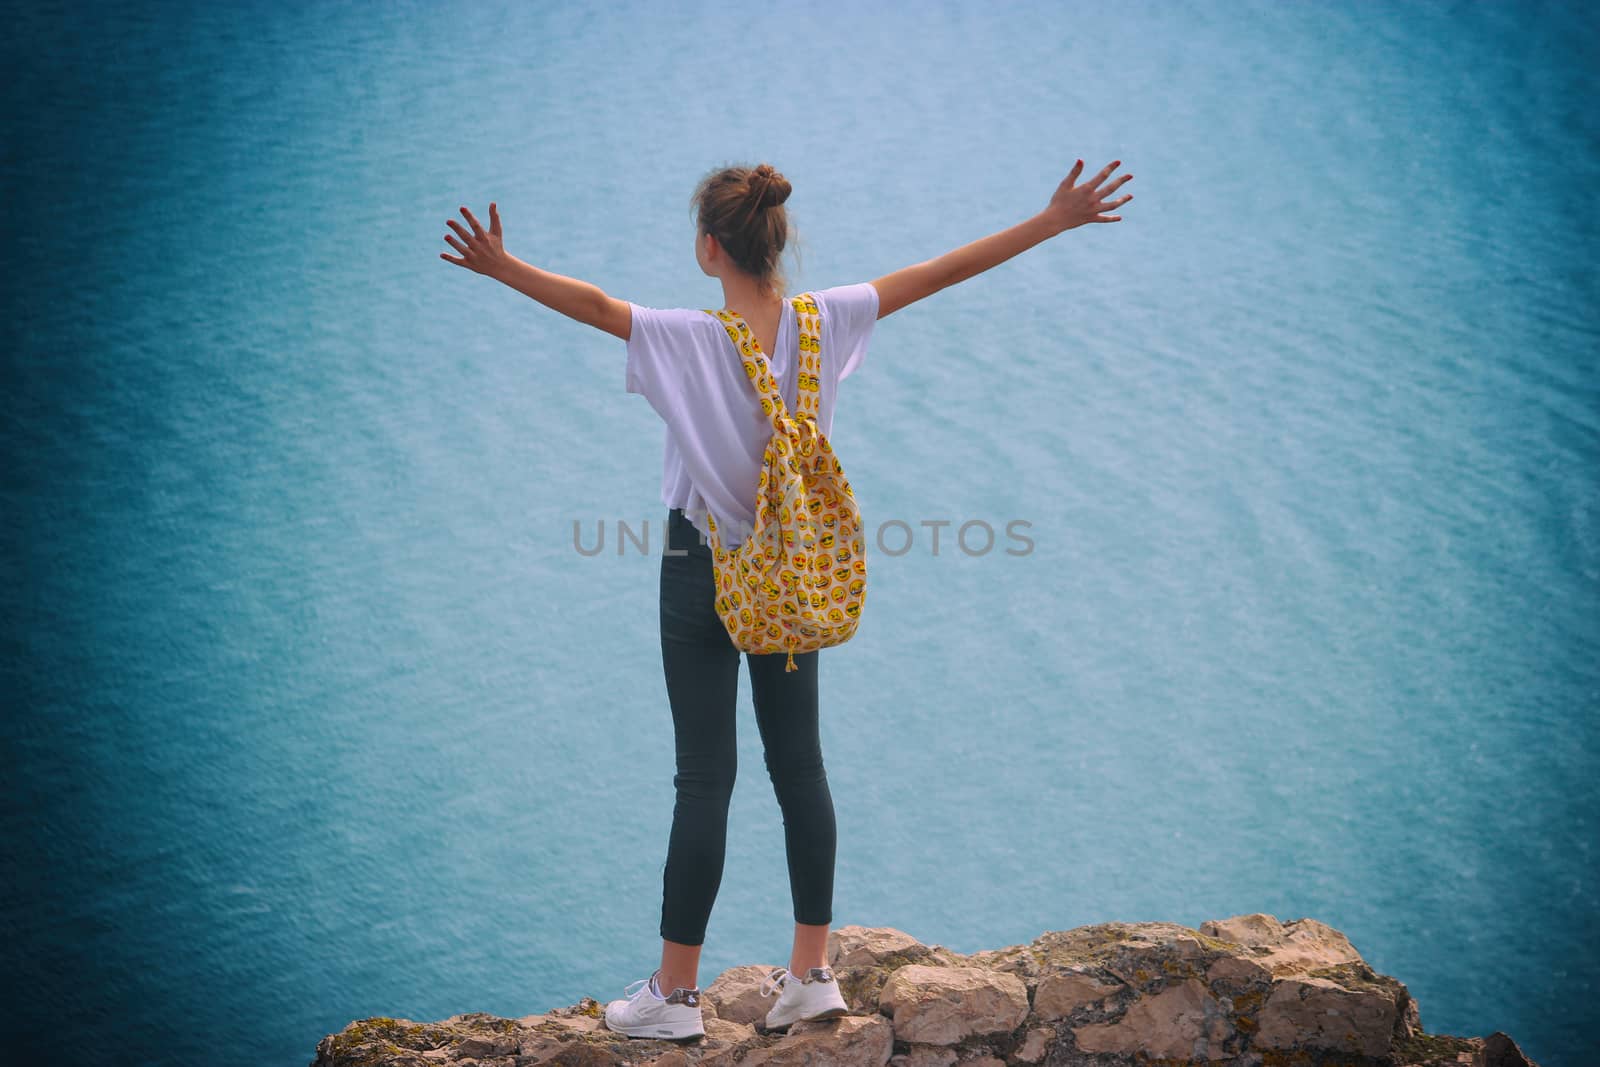 La Turbie, France - March 22, 2016: Freedom Concept. Free Happy Young Woman with a Backpack with Smileys Enjoying Nature. Mediterranean Sea in the Background